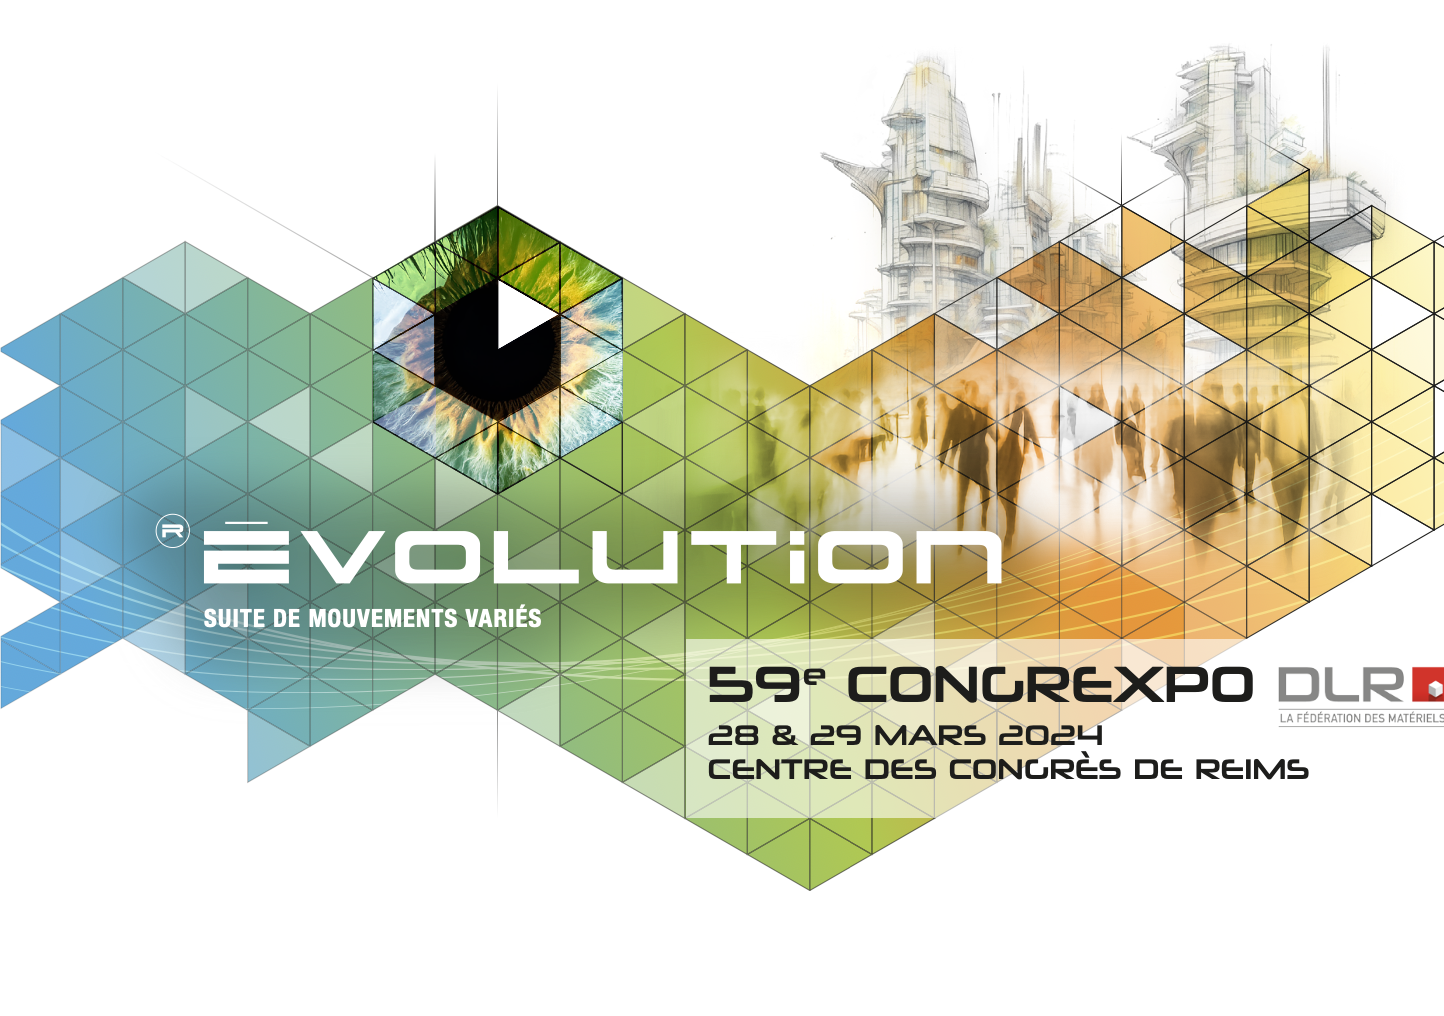 The DLR holds its 59th Congress in Reims on March 28 and 29